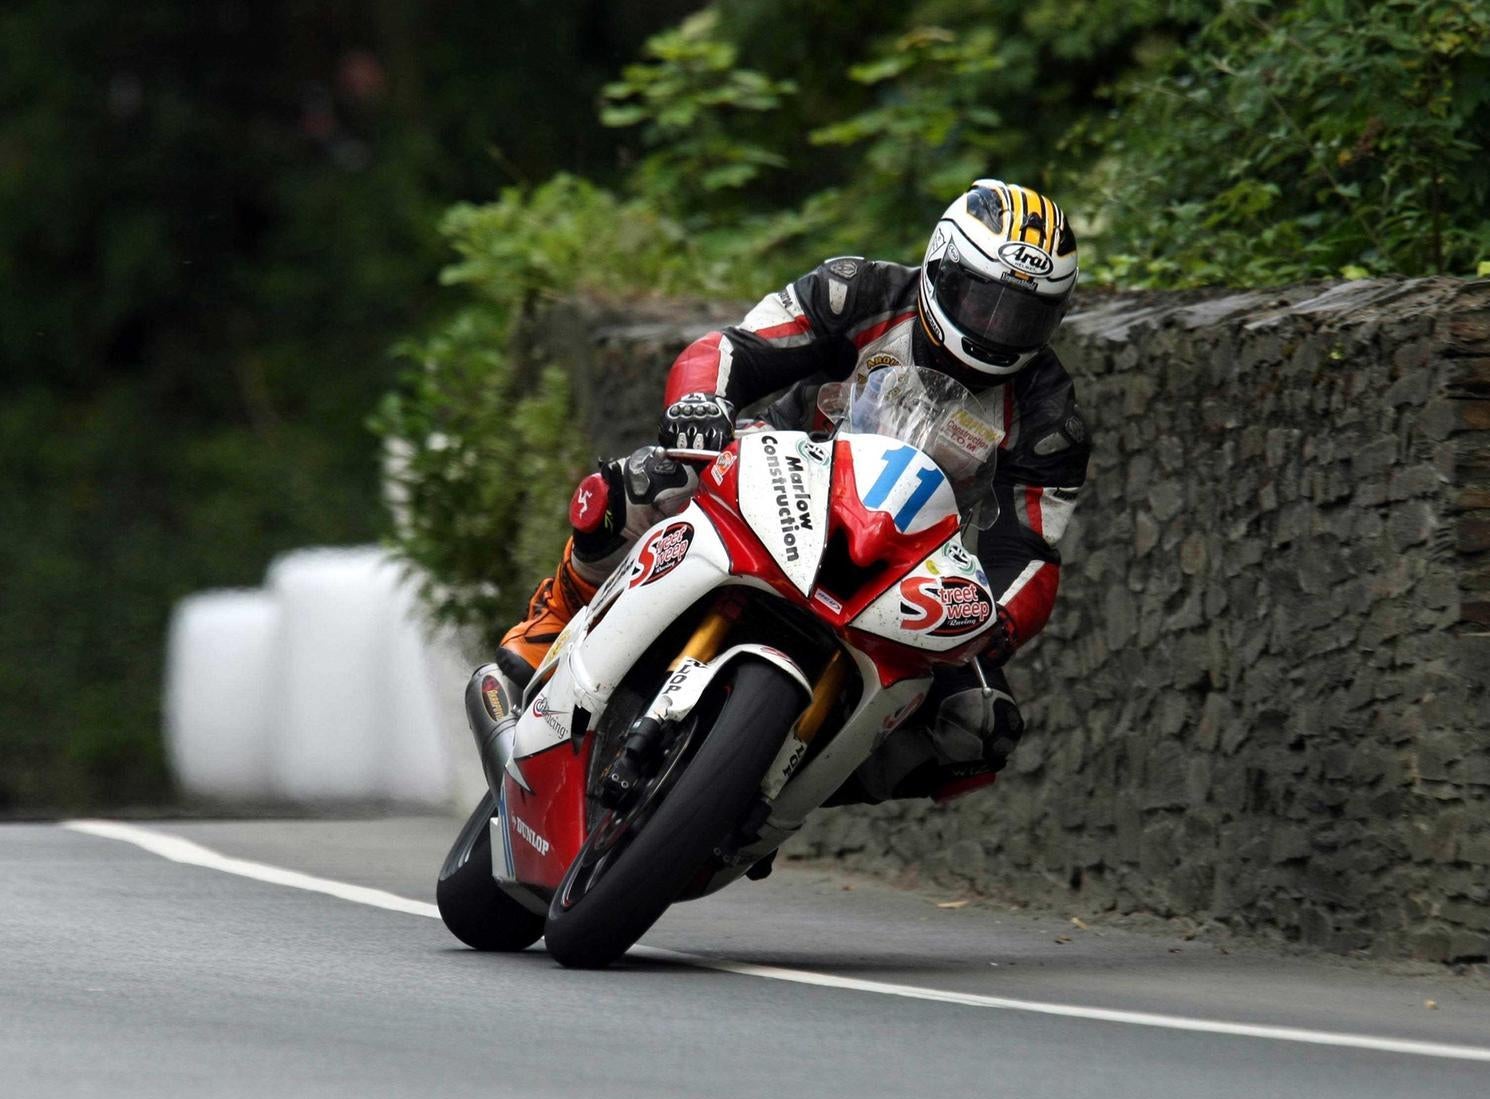 Michael Dunlop at Union Mills on his Street Sweep/Marlow Yamaha R6 in the 2009 Supersport 2 TT.